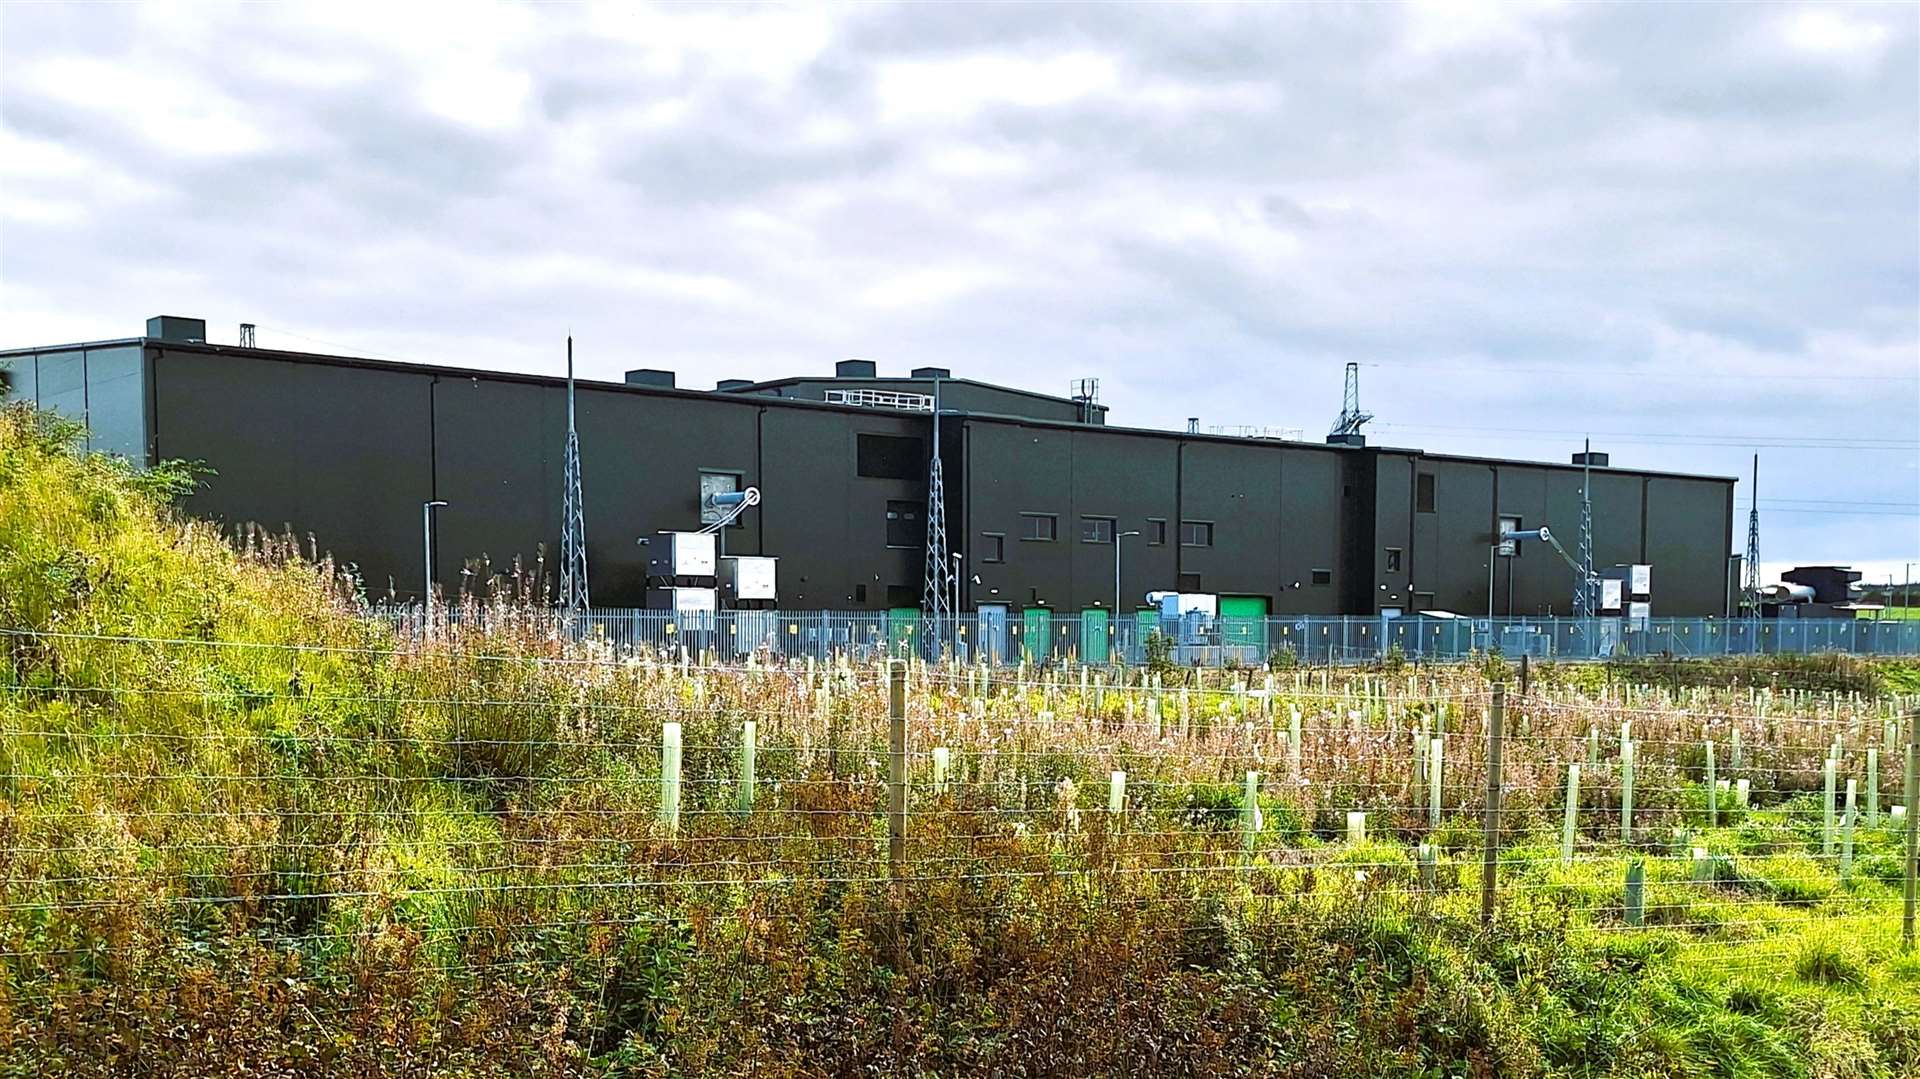 The company plans new developments at Spittal substation. Picture: DGS